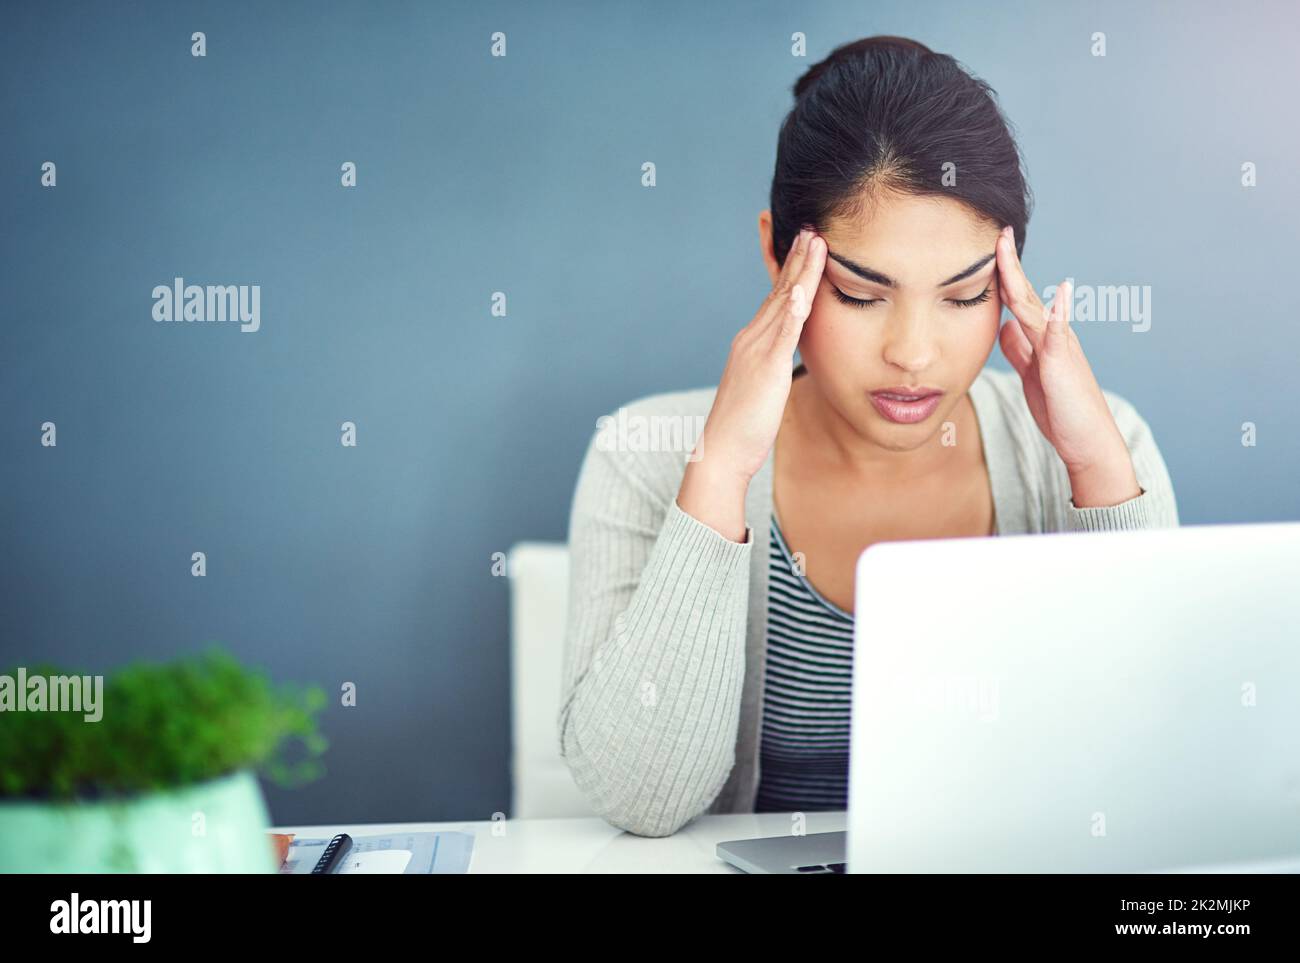 Dont let your job suck the happiness out of you. Shot of a businesswoman sitting with her hands on her head. Stock Photo